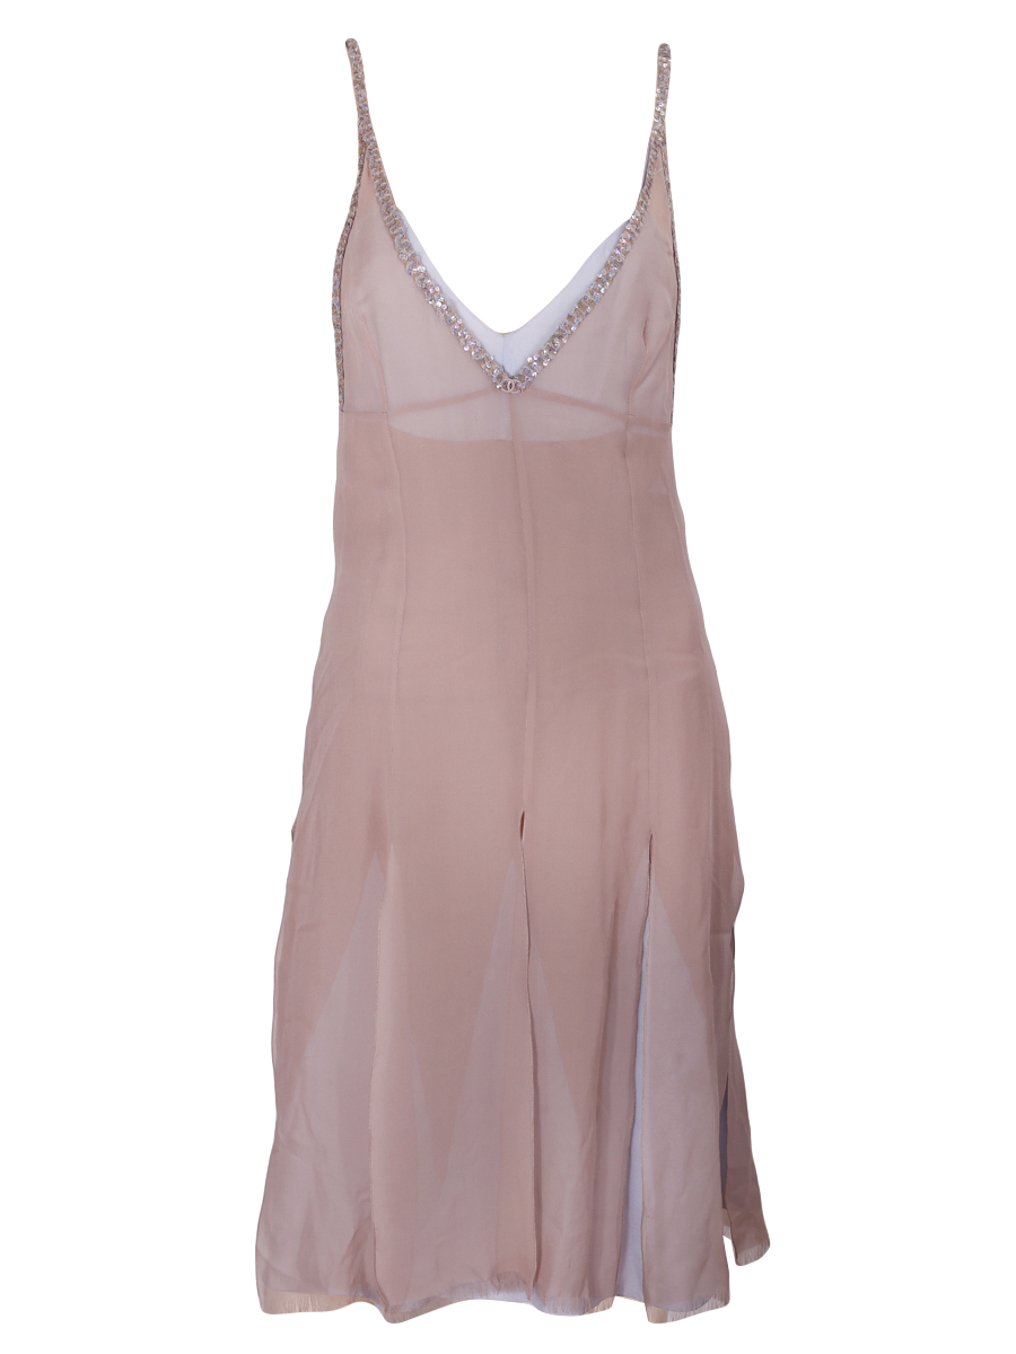 Chanel Silk Beige Mid-Length Dress - Preowned